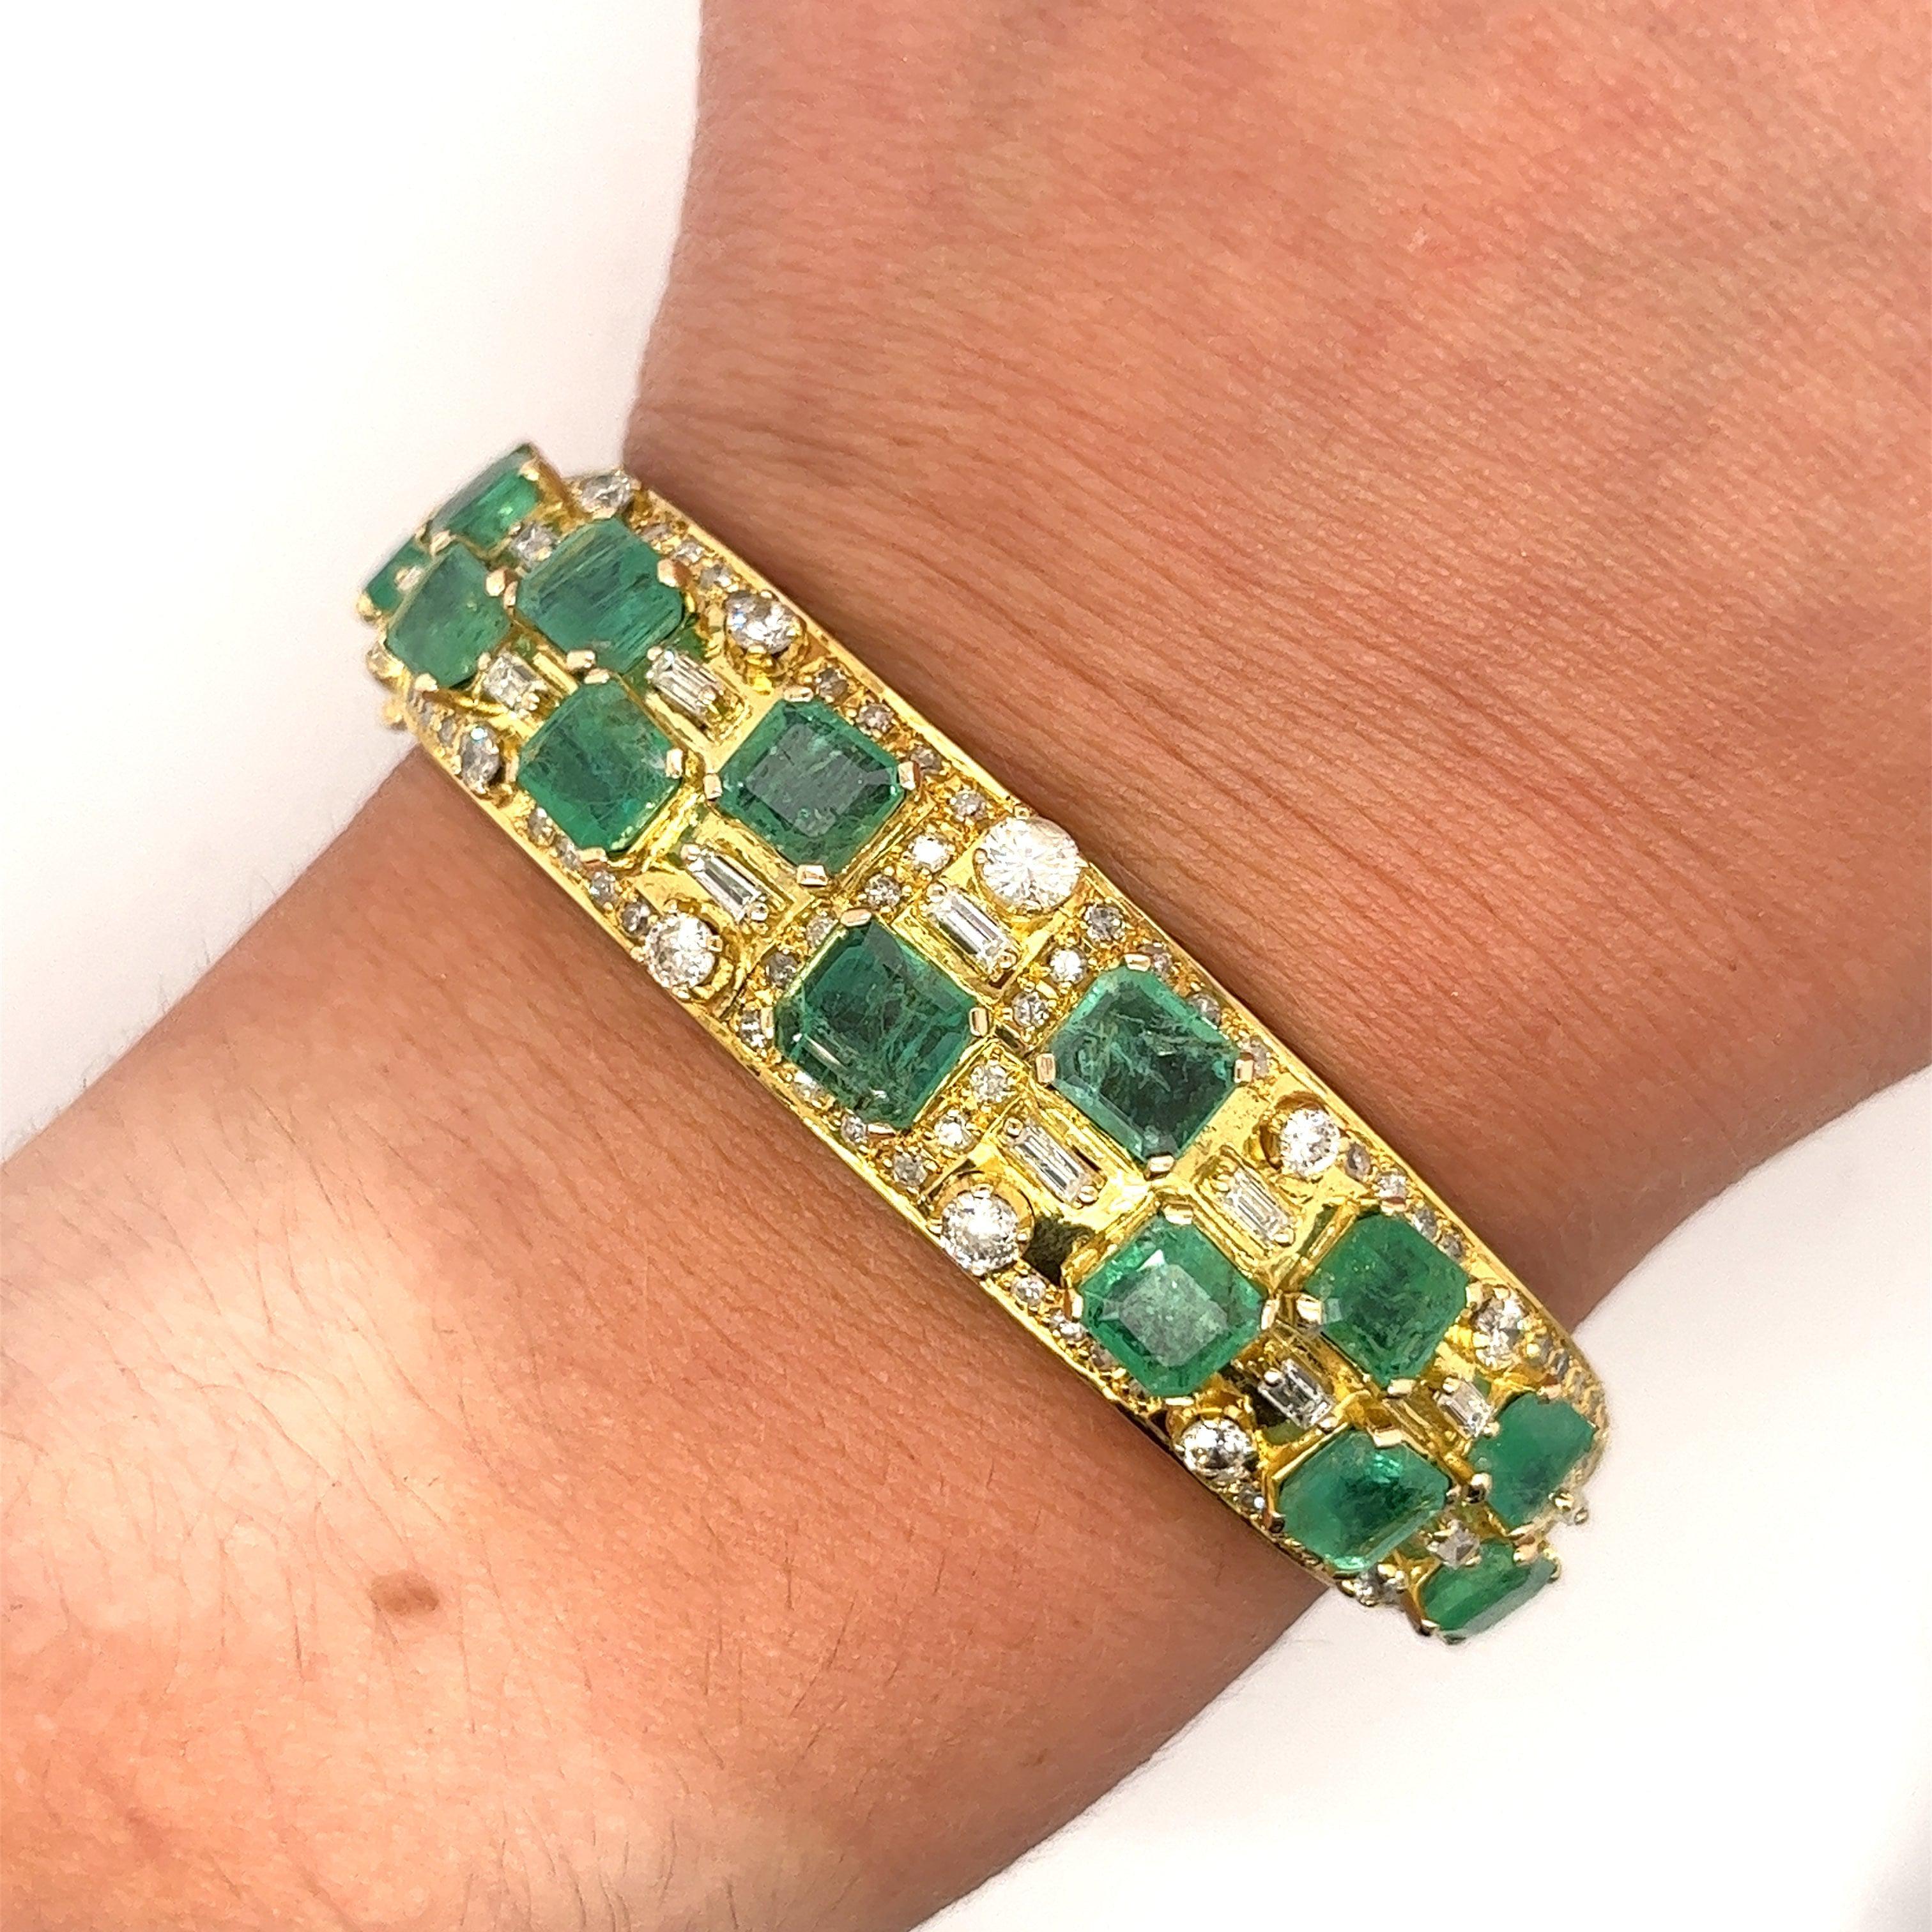 Square-Cut-Emerald-and-Baguette-Diamond-Bangle-in-18k-Yellow-Gold-Bangles-2_7cfe0be5-8c19-4d64-8822-ac178562795e.jpg